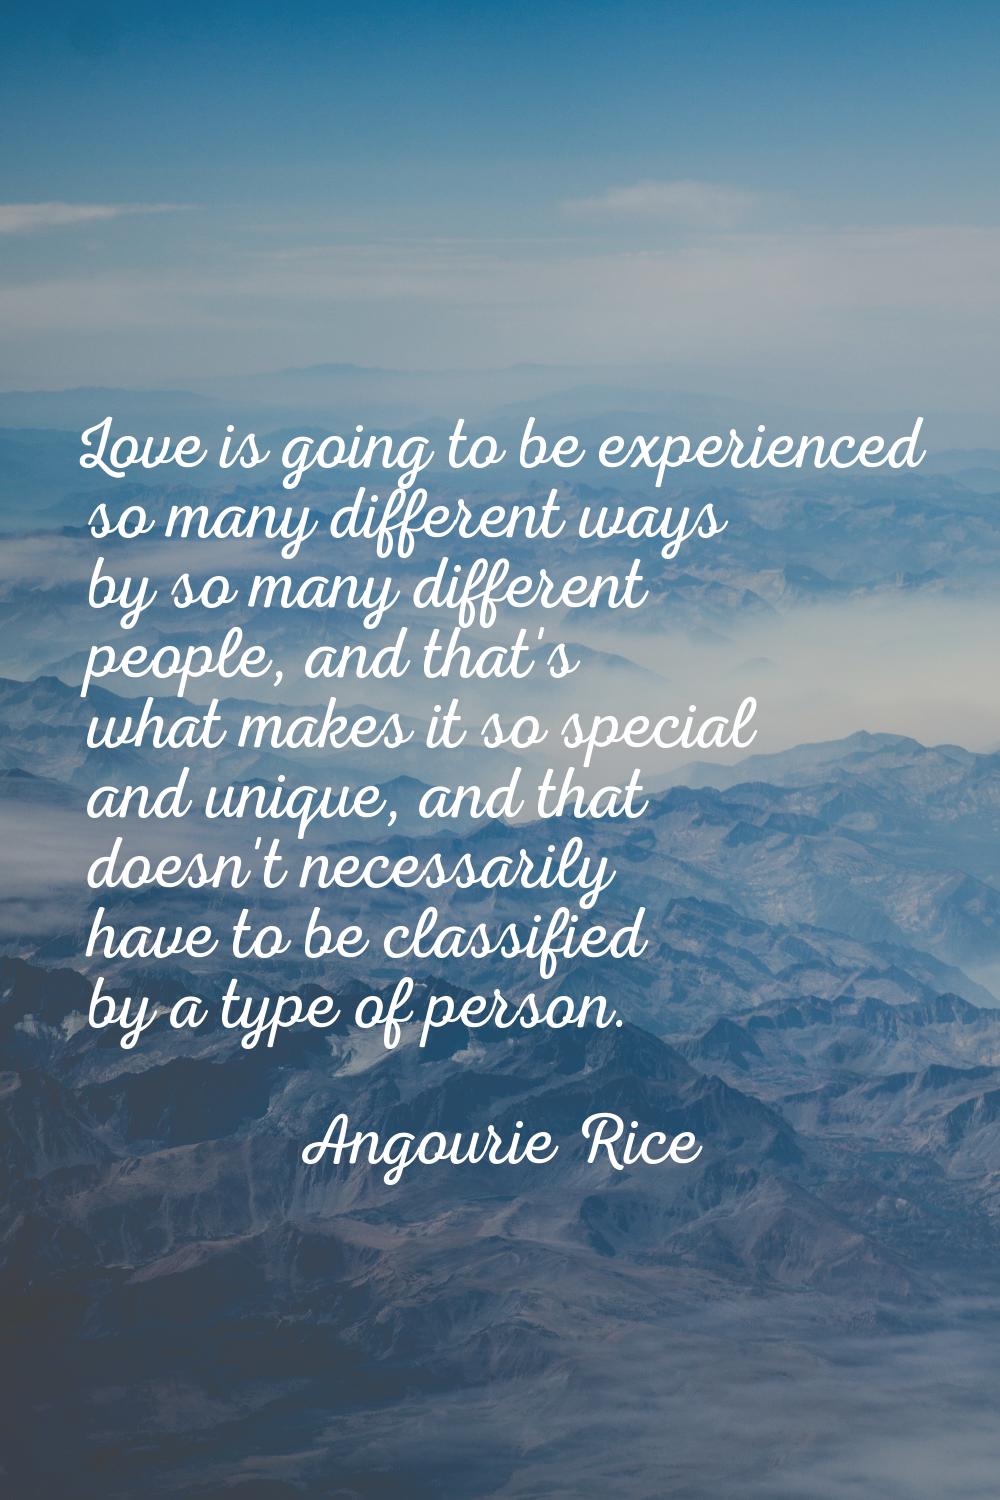 Love is going to be experienced so many different ways by so many different people, and that's what